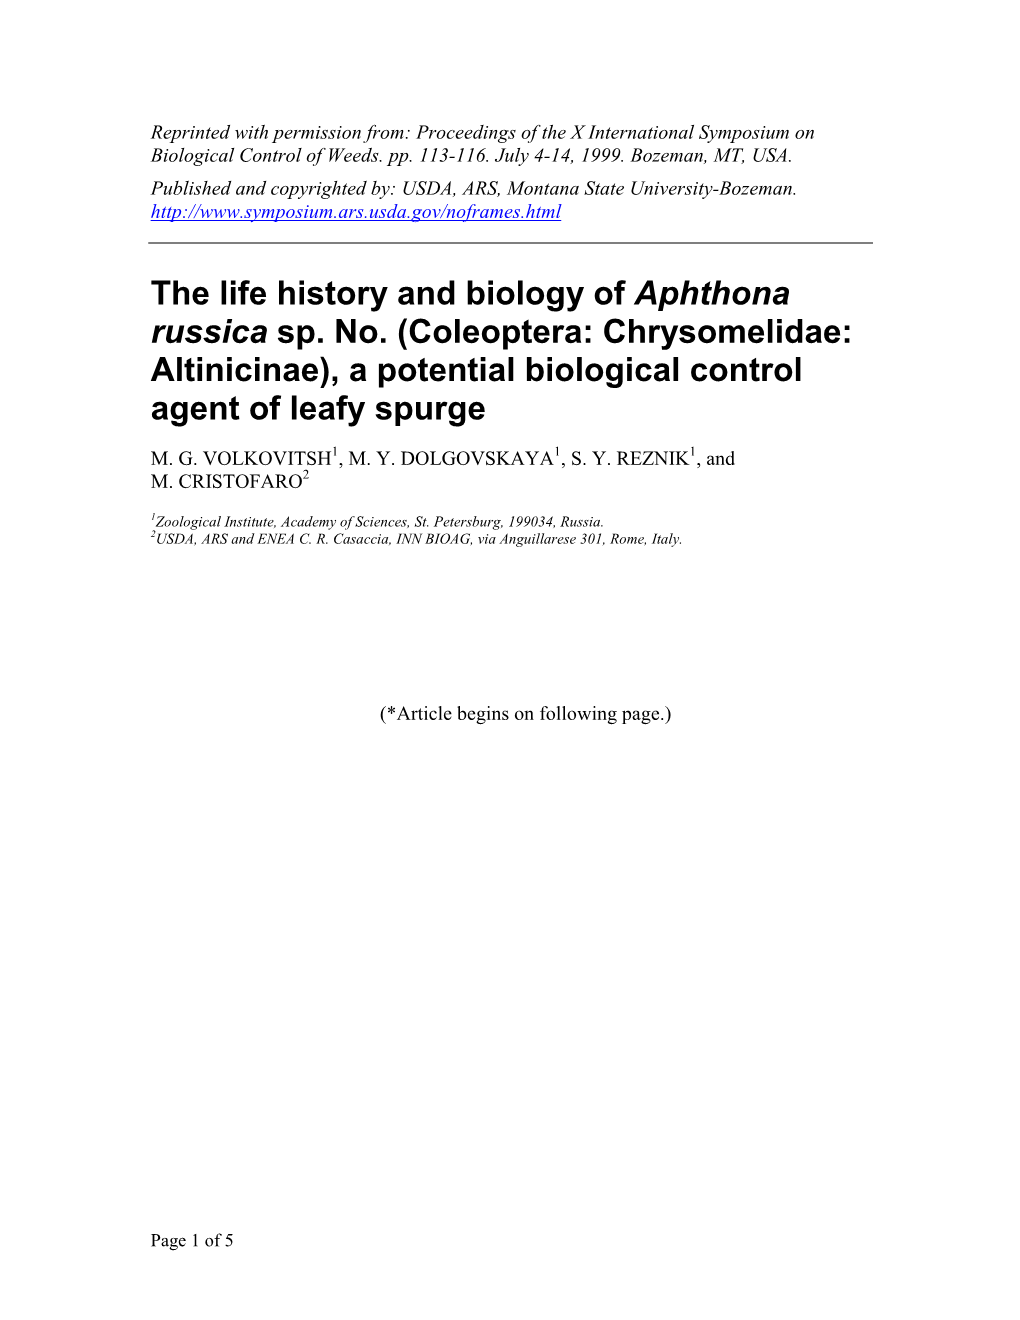 The Life History and Biology of Aphthona Russica Sp. Nov